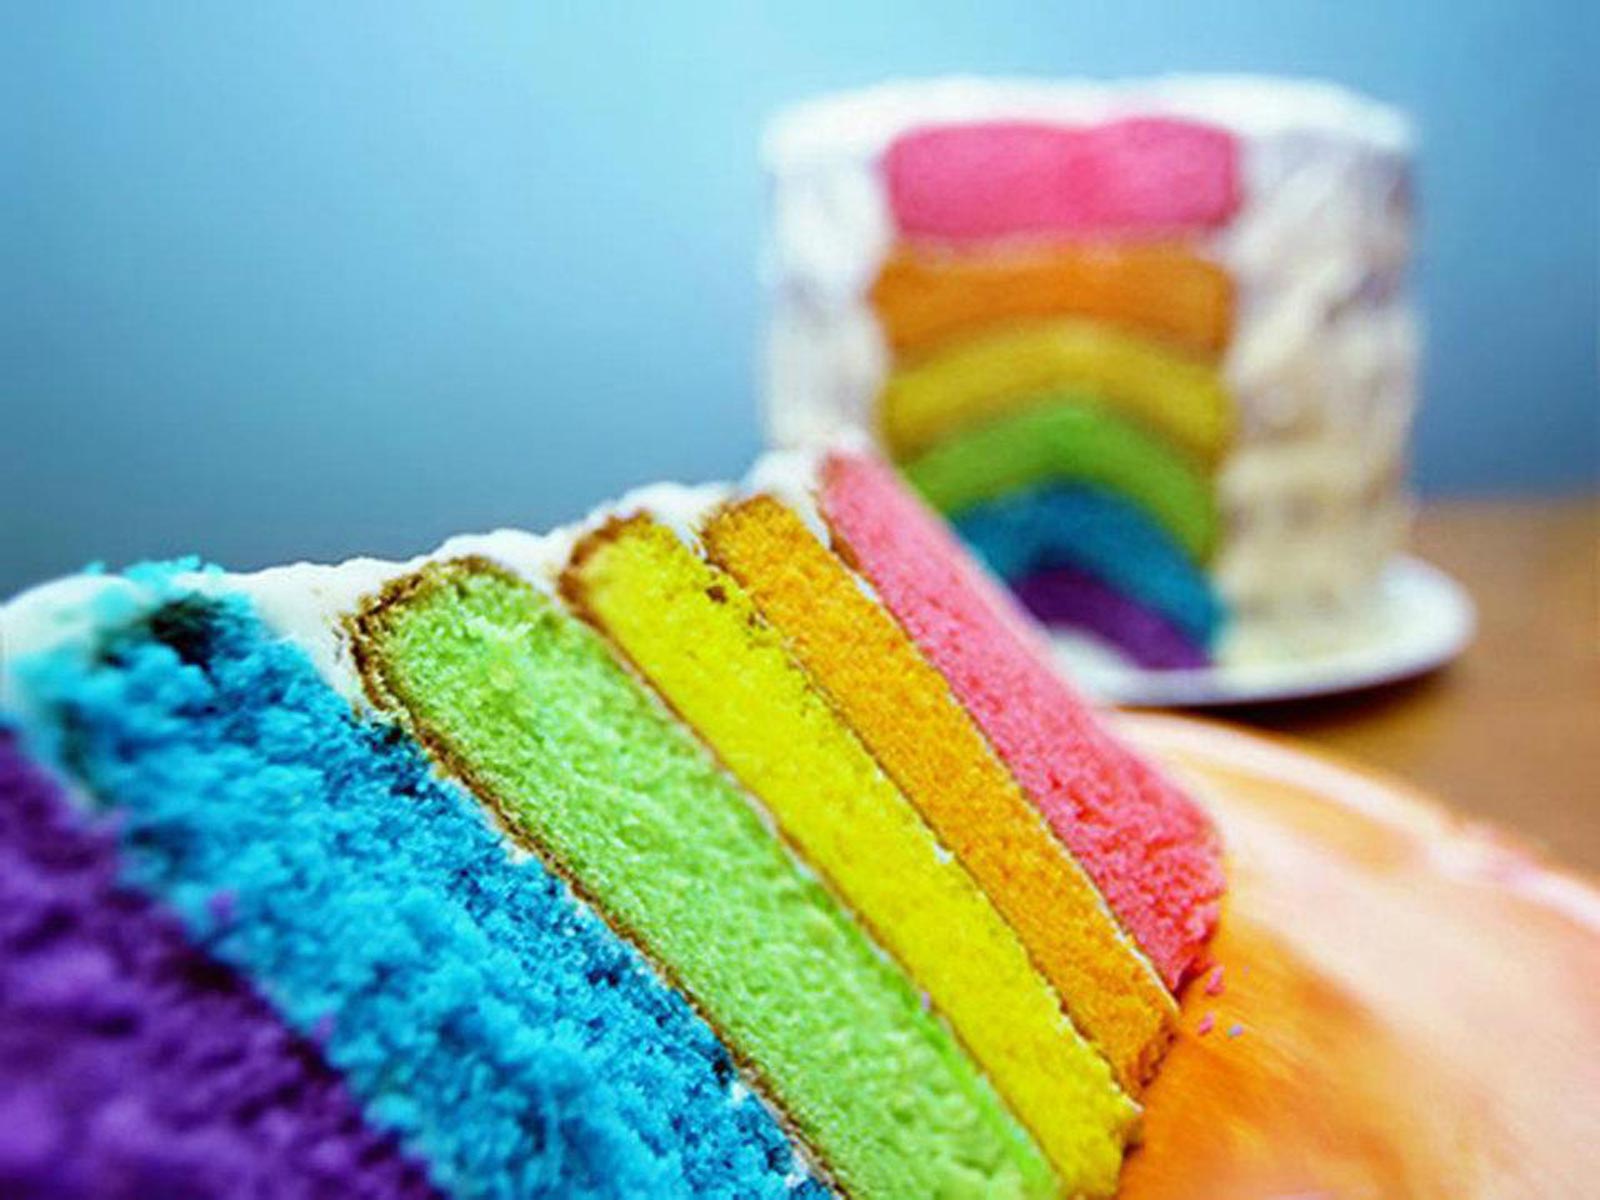 Sweet-and-Delish-Rainbow-Cake-colors-34691726-1600-1200